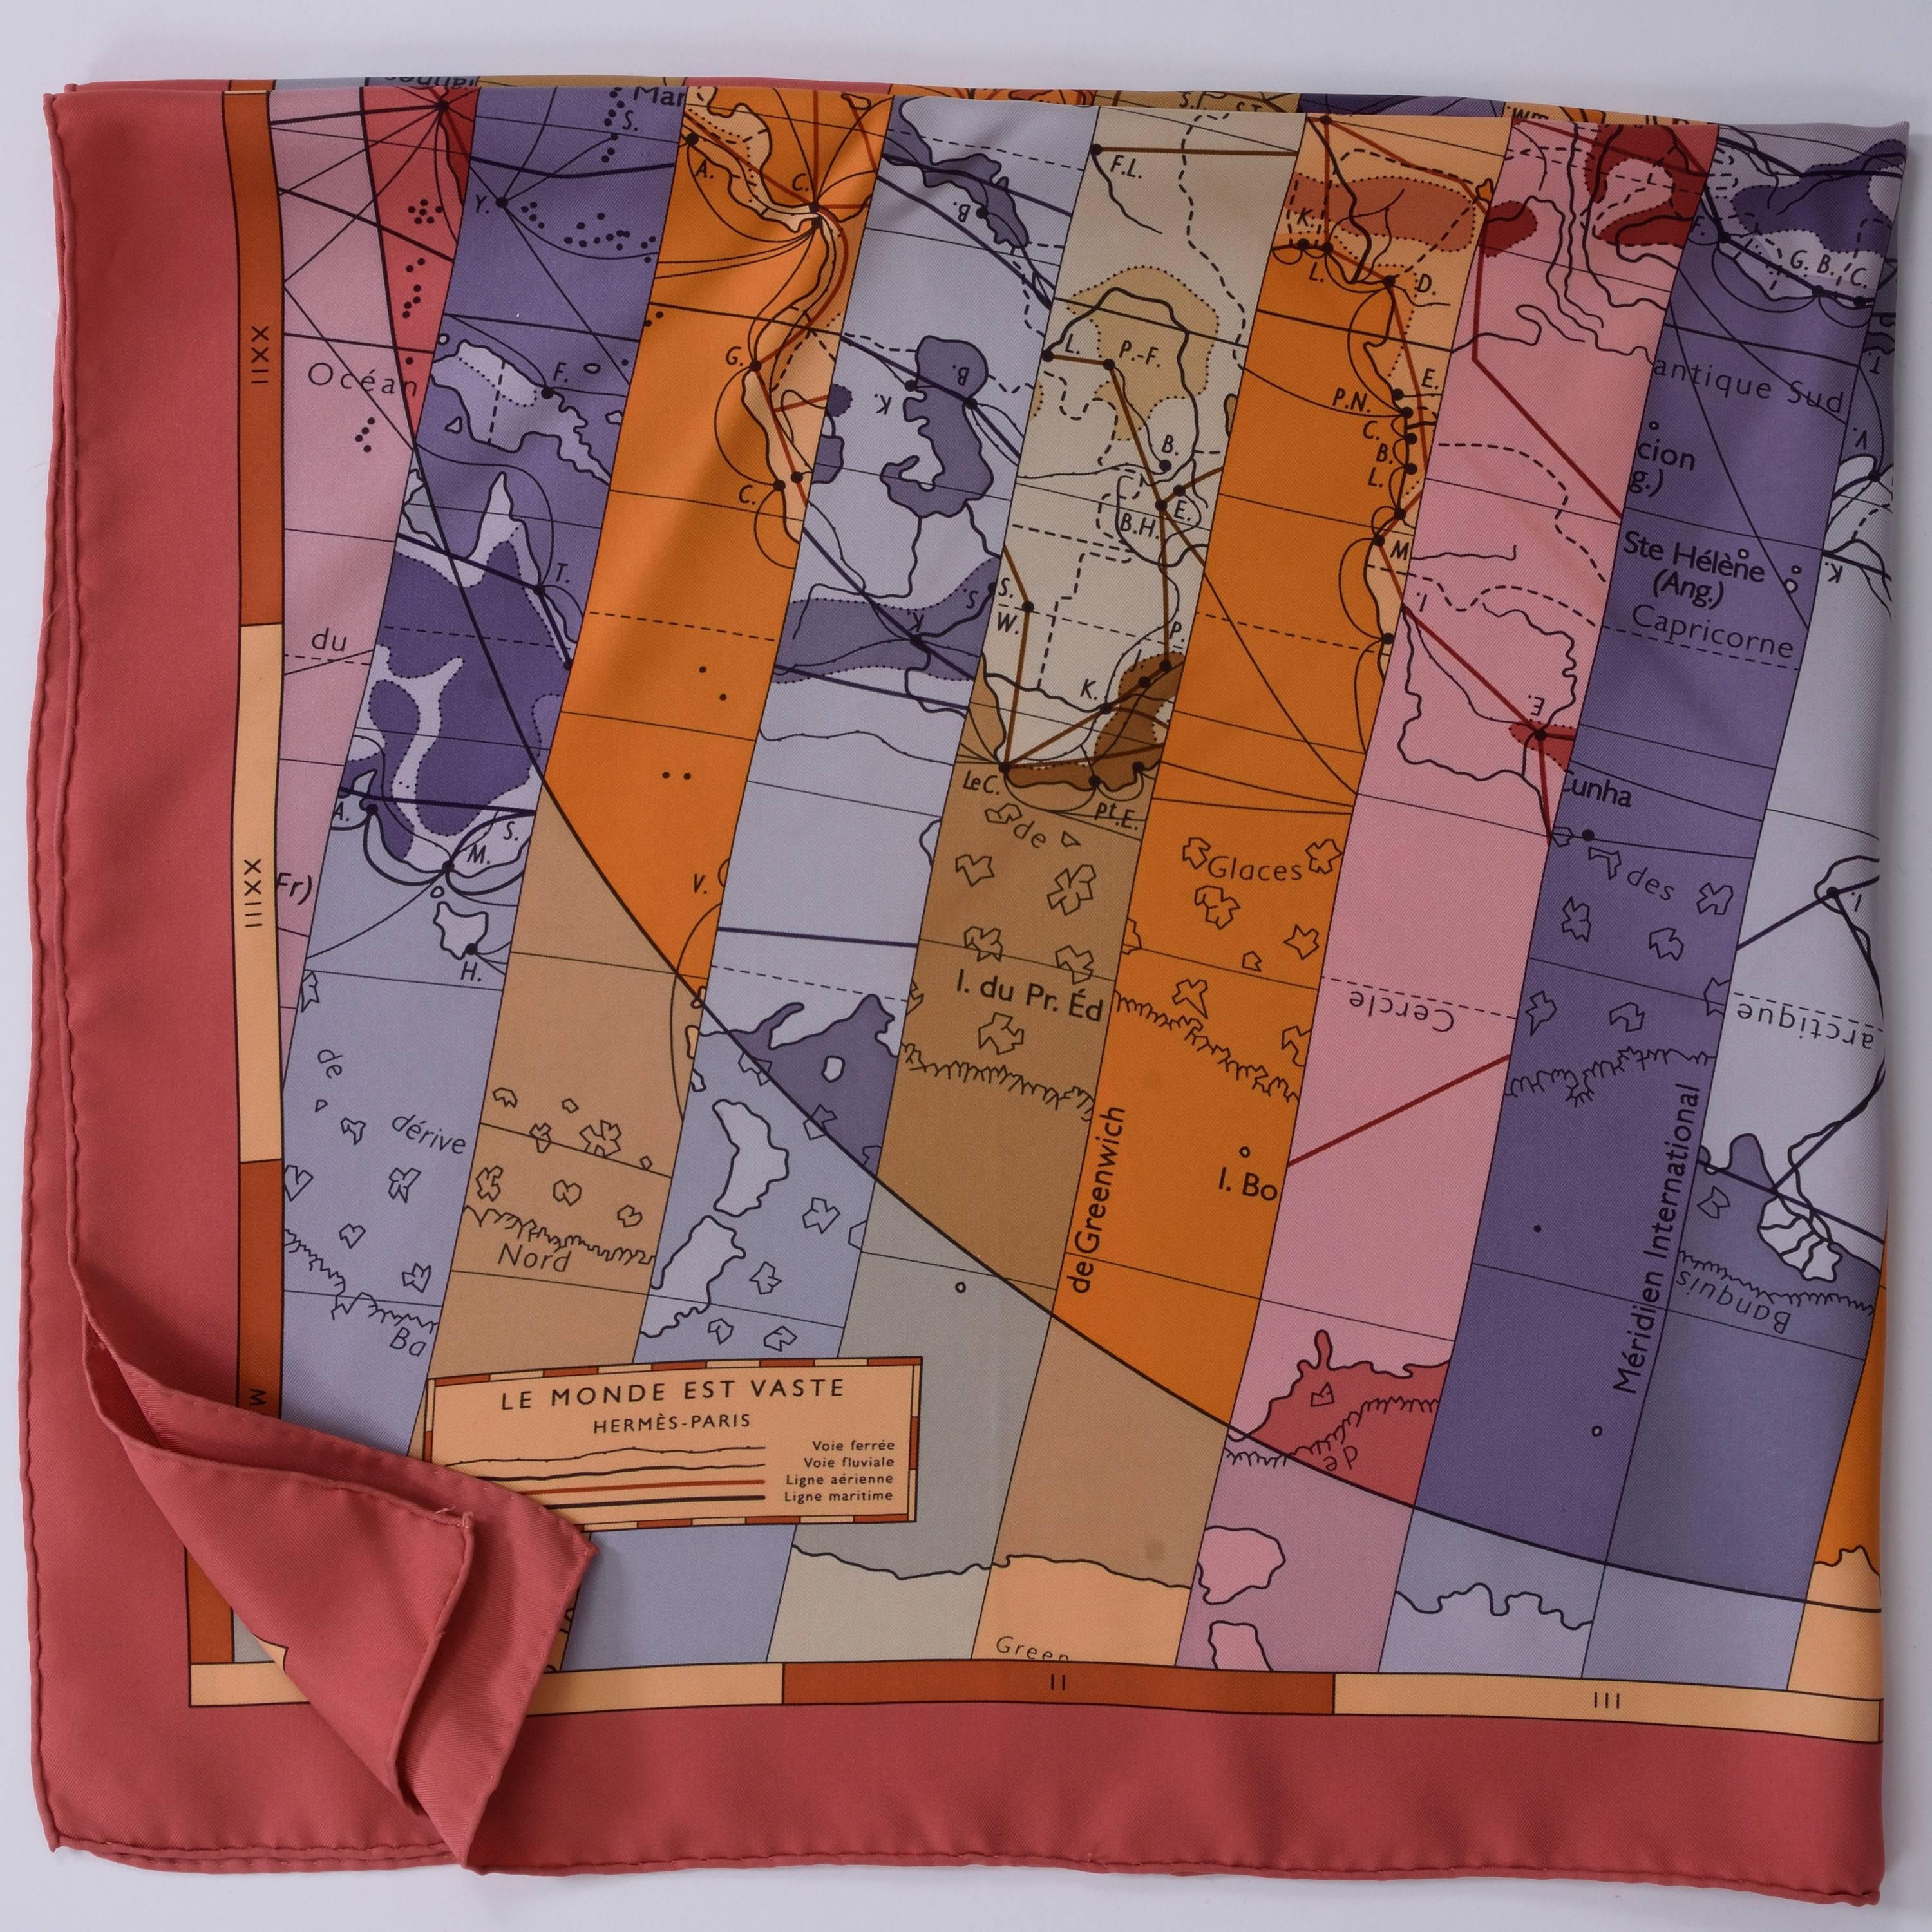 This authentic Hermès Scarf is 100% silk and has gray, purple and coral background with geography motif, with hand-rolled edging. 

Excellent condition 

Design by Cyrille Diatkine in 2009  -Made in France-

MEASUREMENTS:
35 x 35 inches